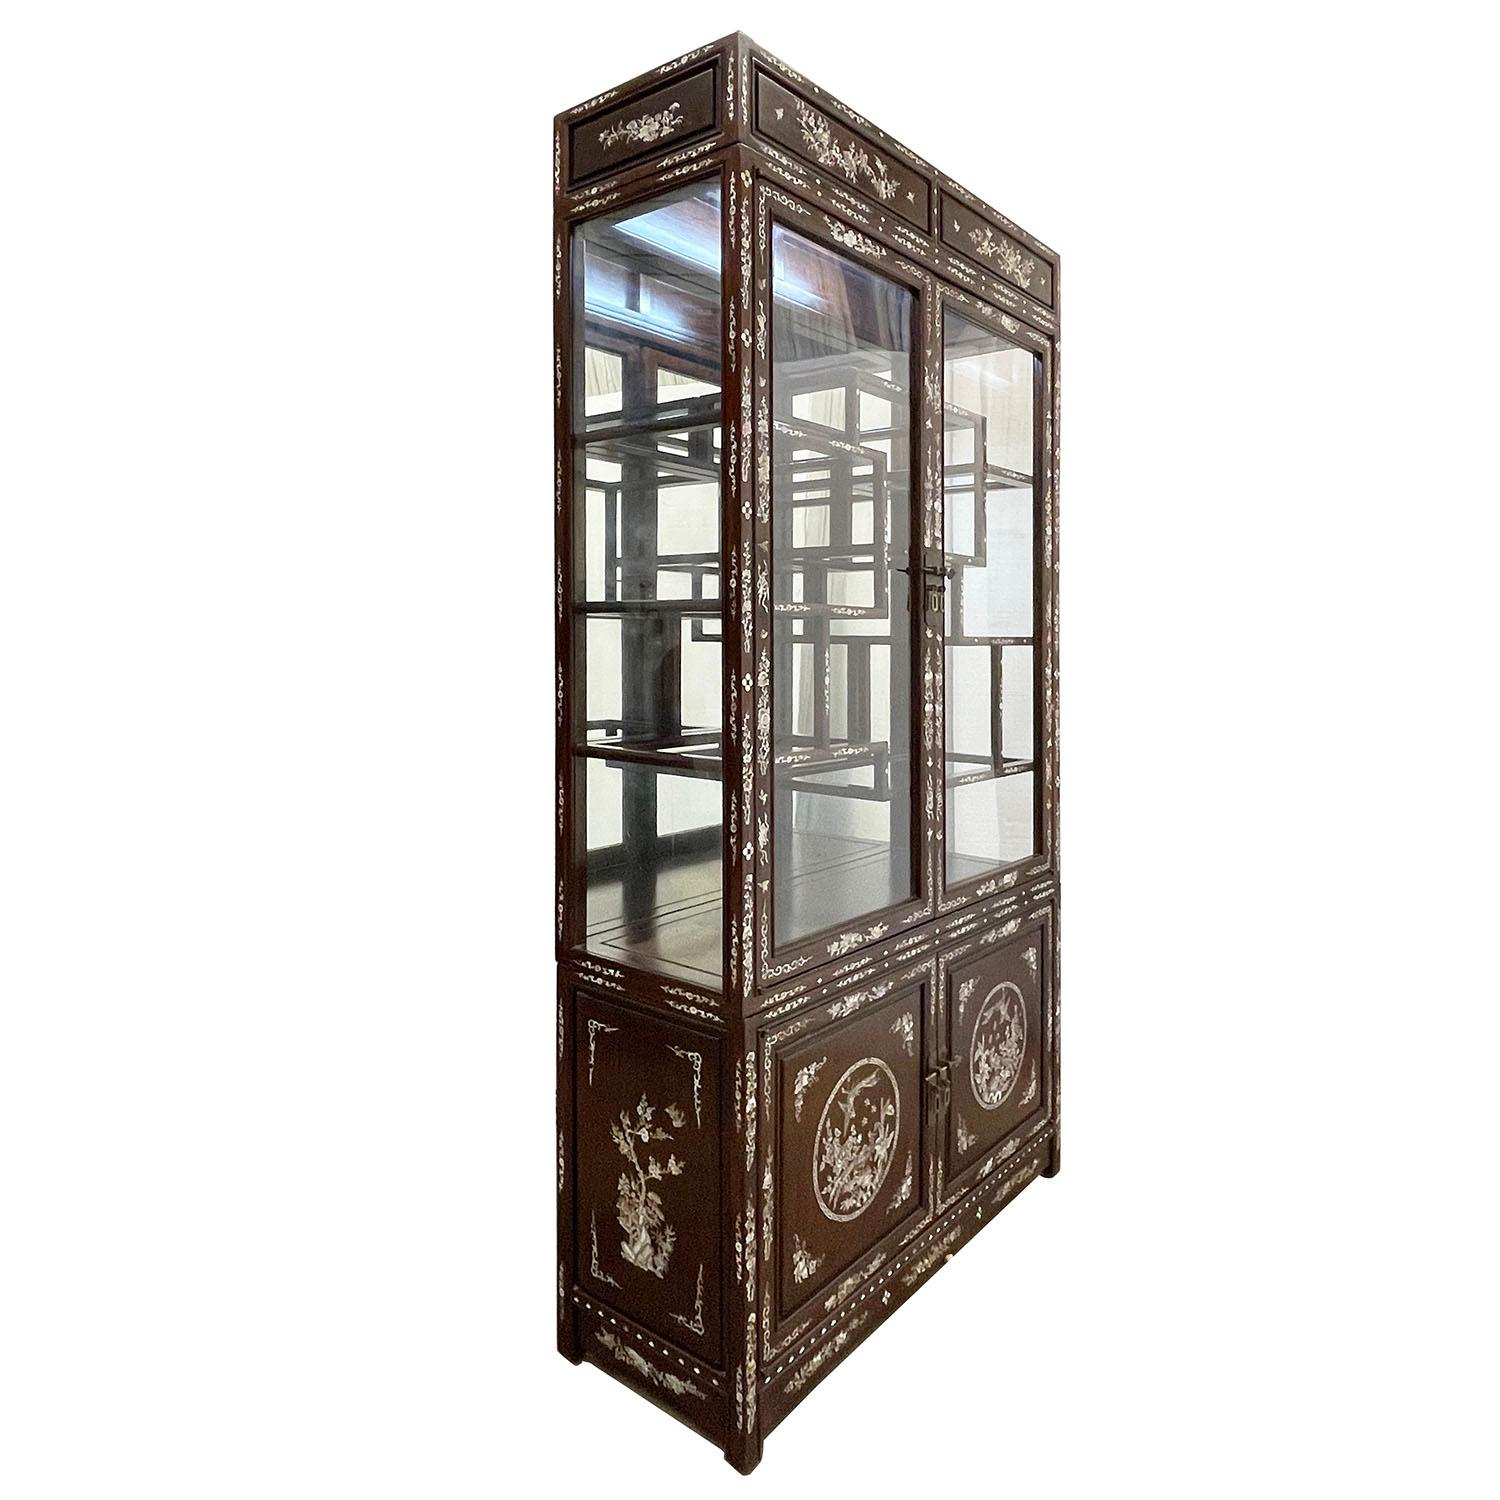 Size: 76in H x 40in W x 14in D
Door opening: Top glass door: 44in H x 37in W
 Bottom wooden door: 18 1/4in H x 37in W
Drawer: 3 1/2in H x 16in W x 10in D 
Origin: China
Circa: 1900 - 1940
Material: Rosewood with Mother of Pearl